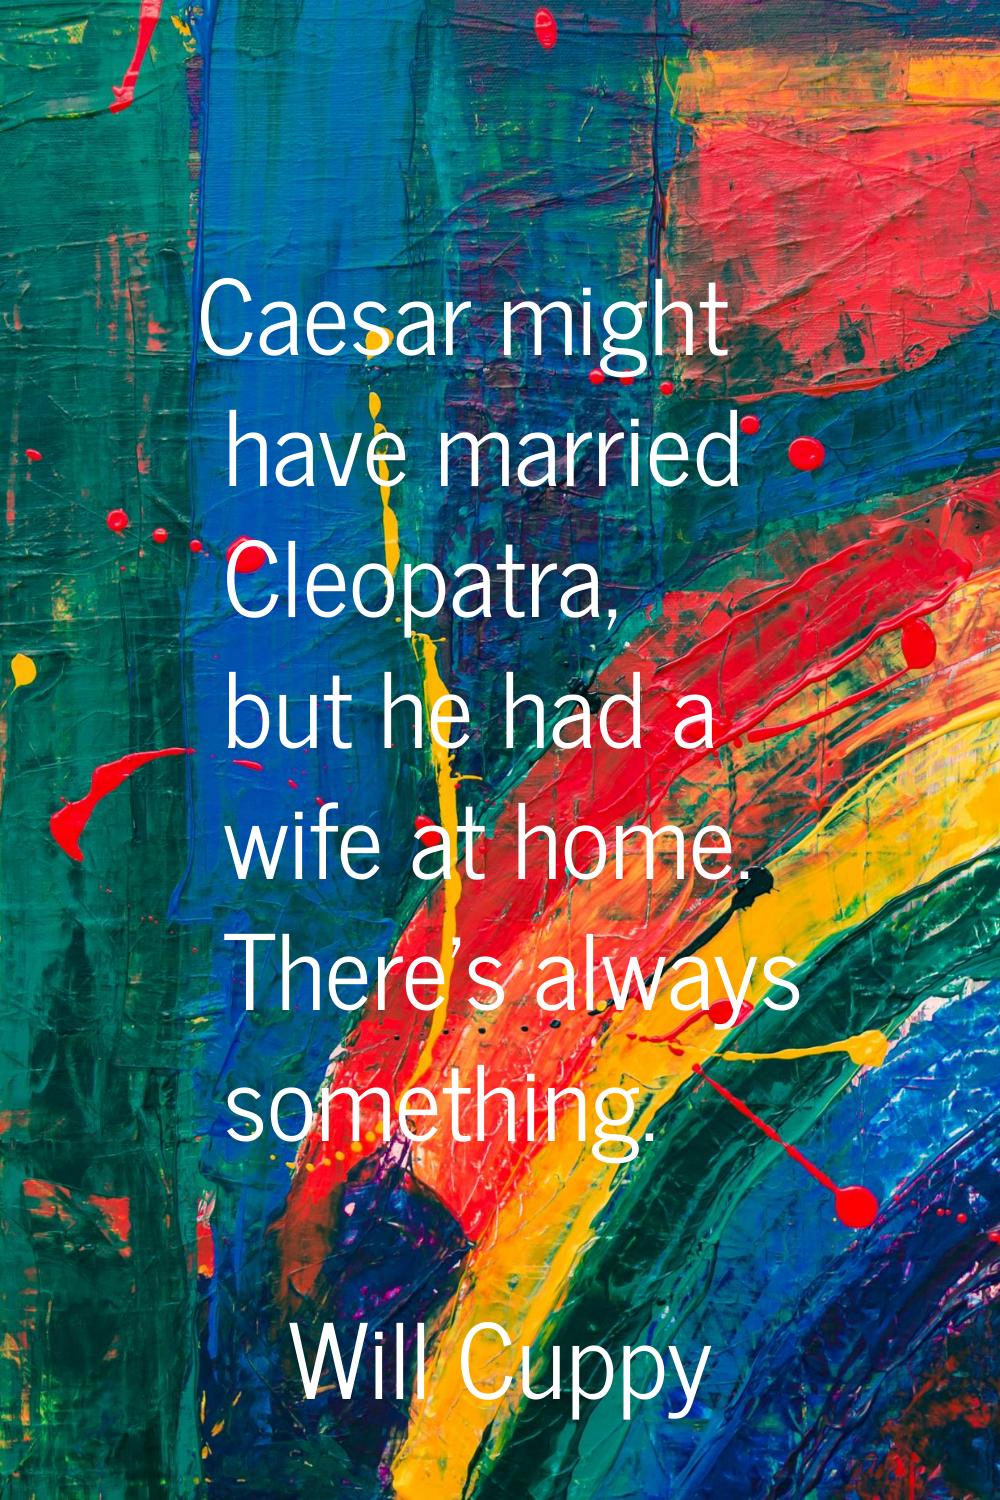 Caesar might have married Cleopatra, but he had a wife at home. There's always something.